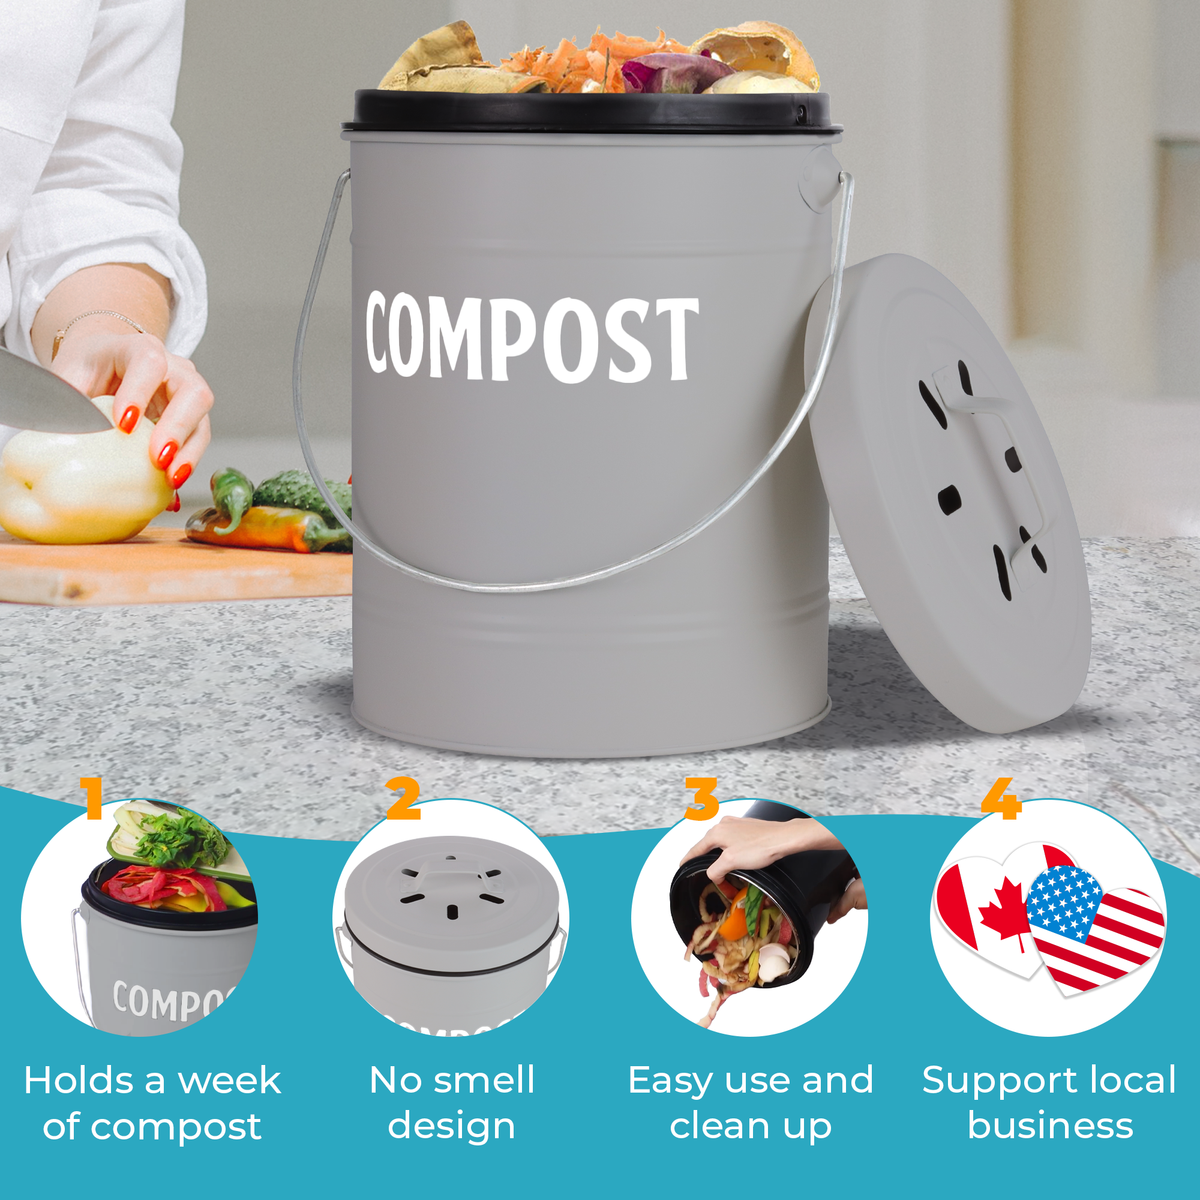 Gray Compost Bin product features easy use and clean up. Support local business